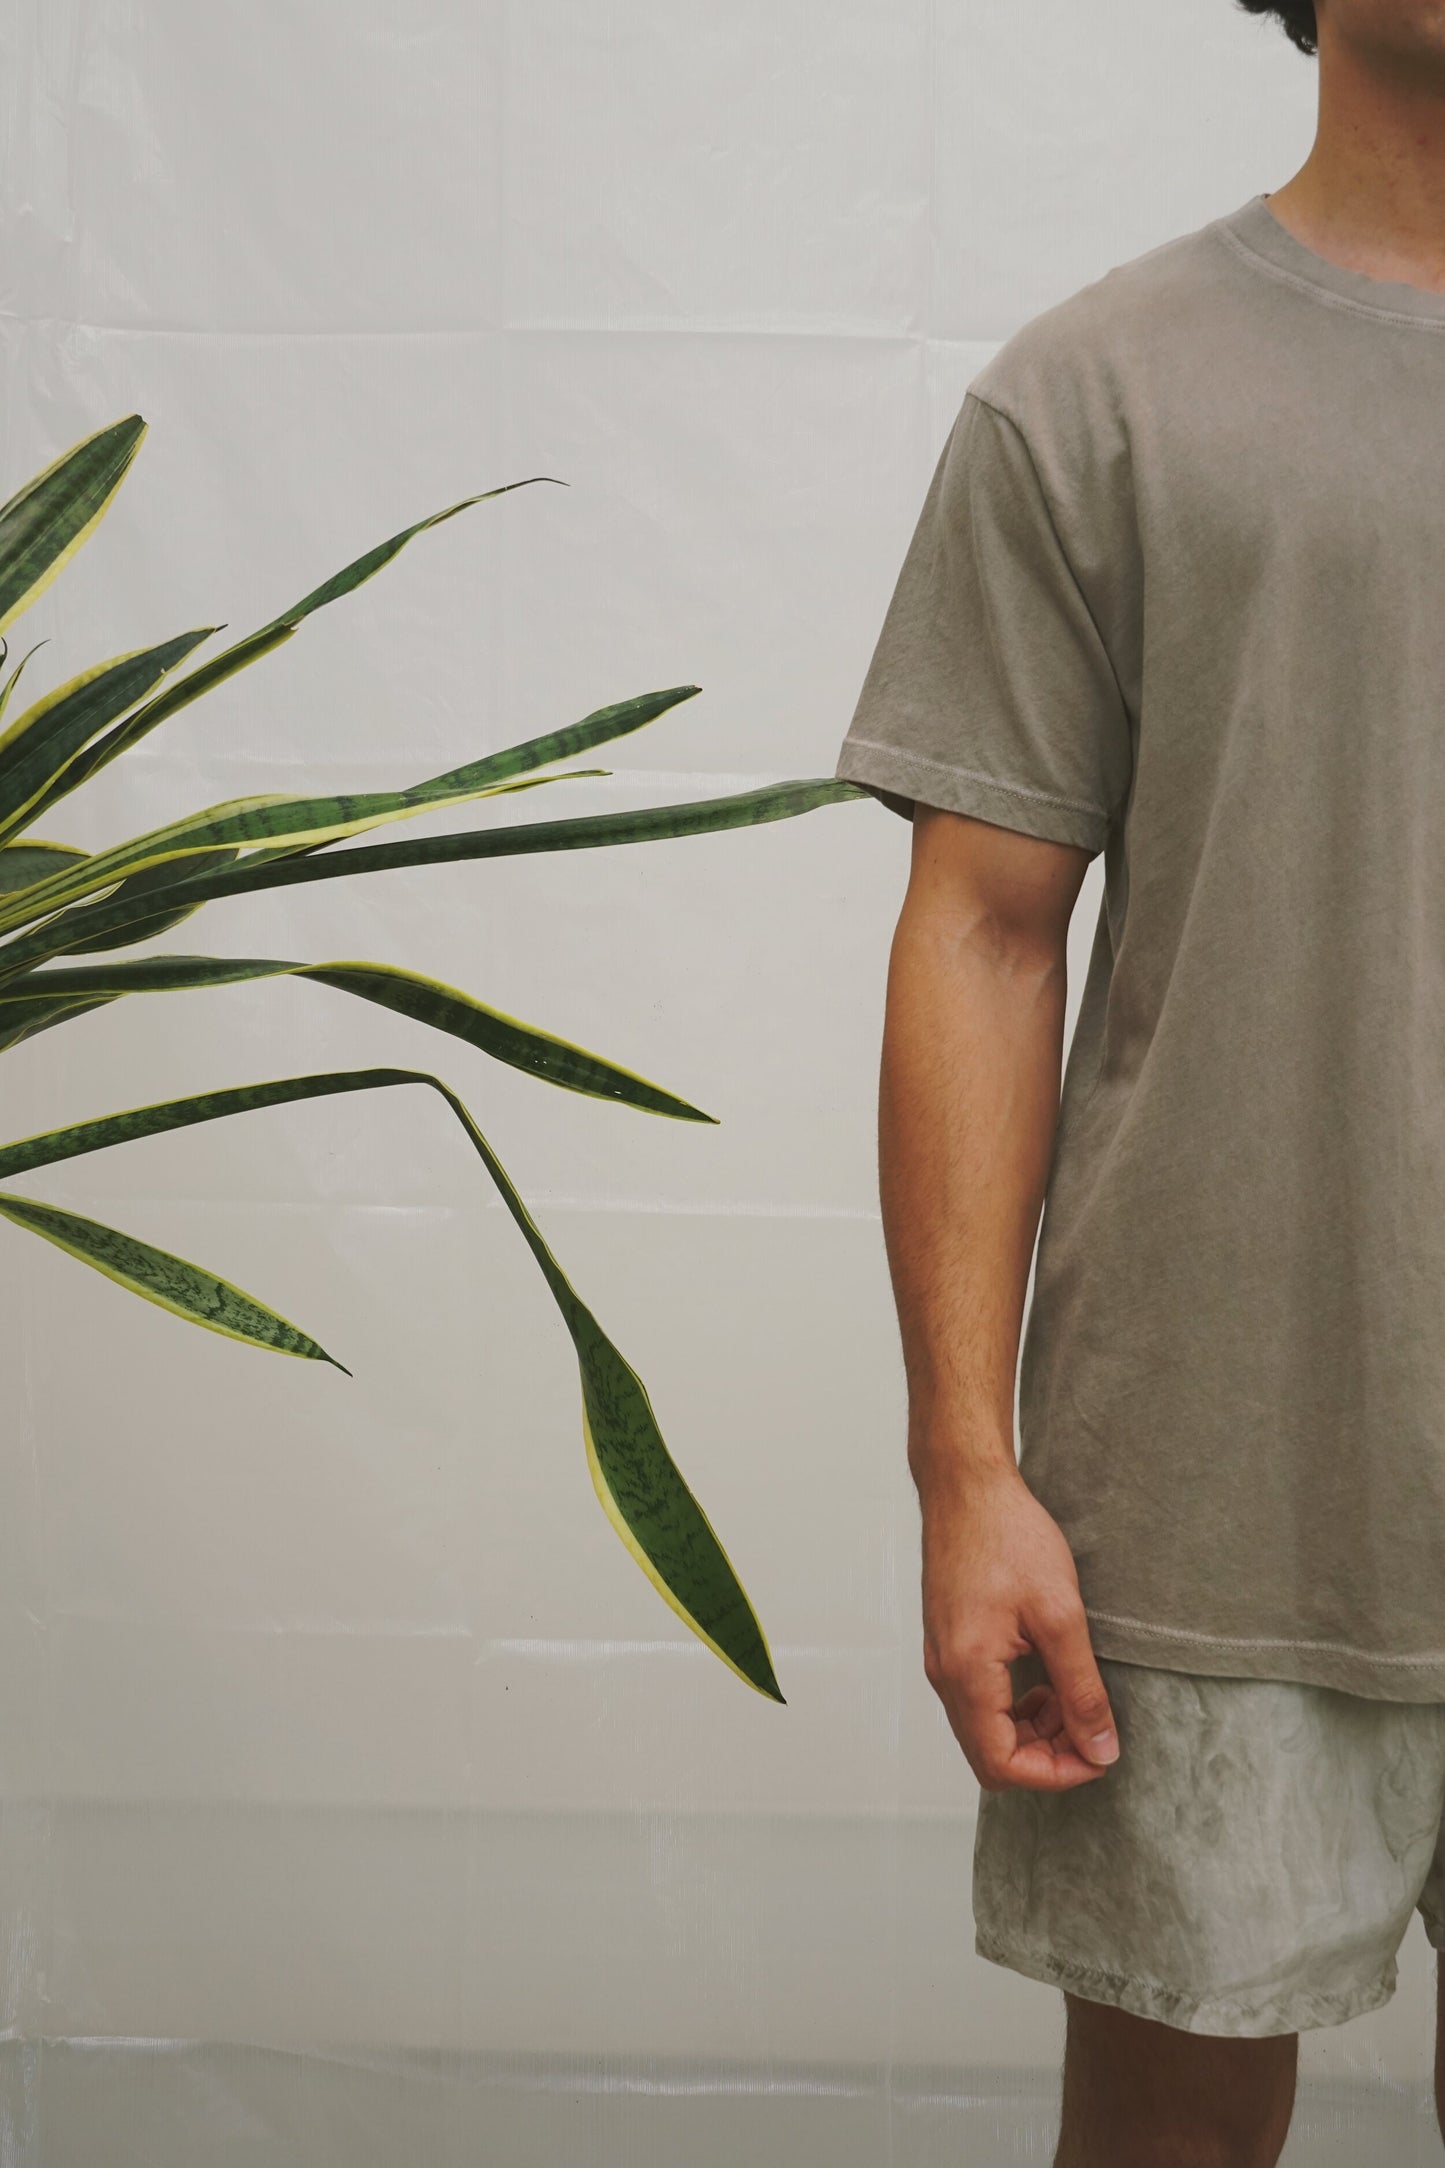 Essential Tee - Fossil